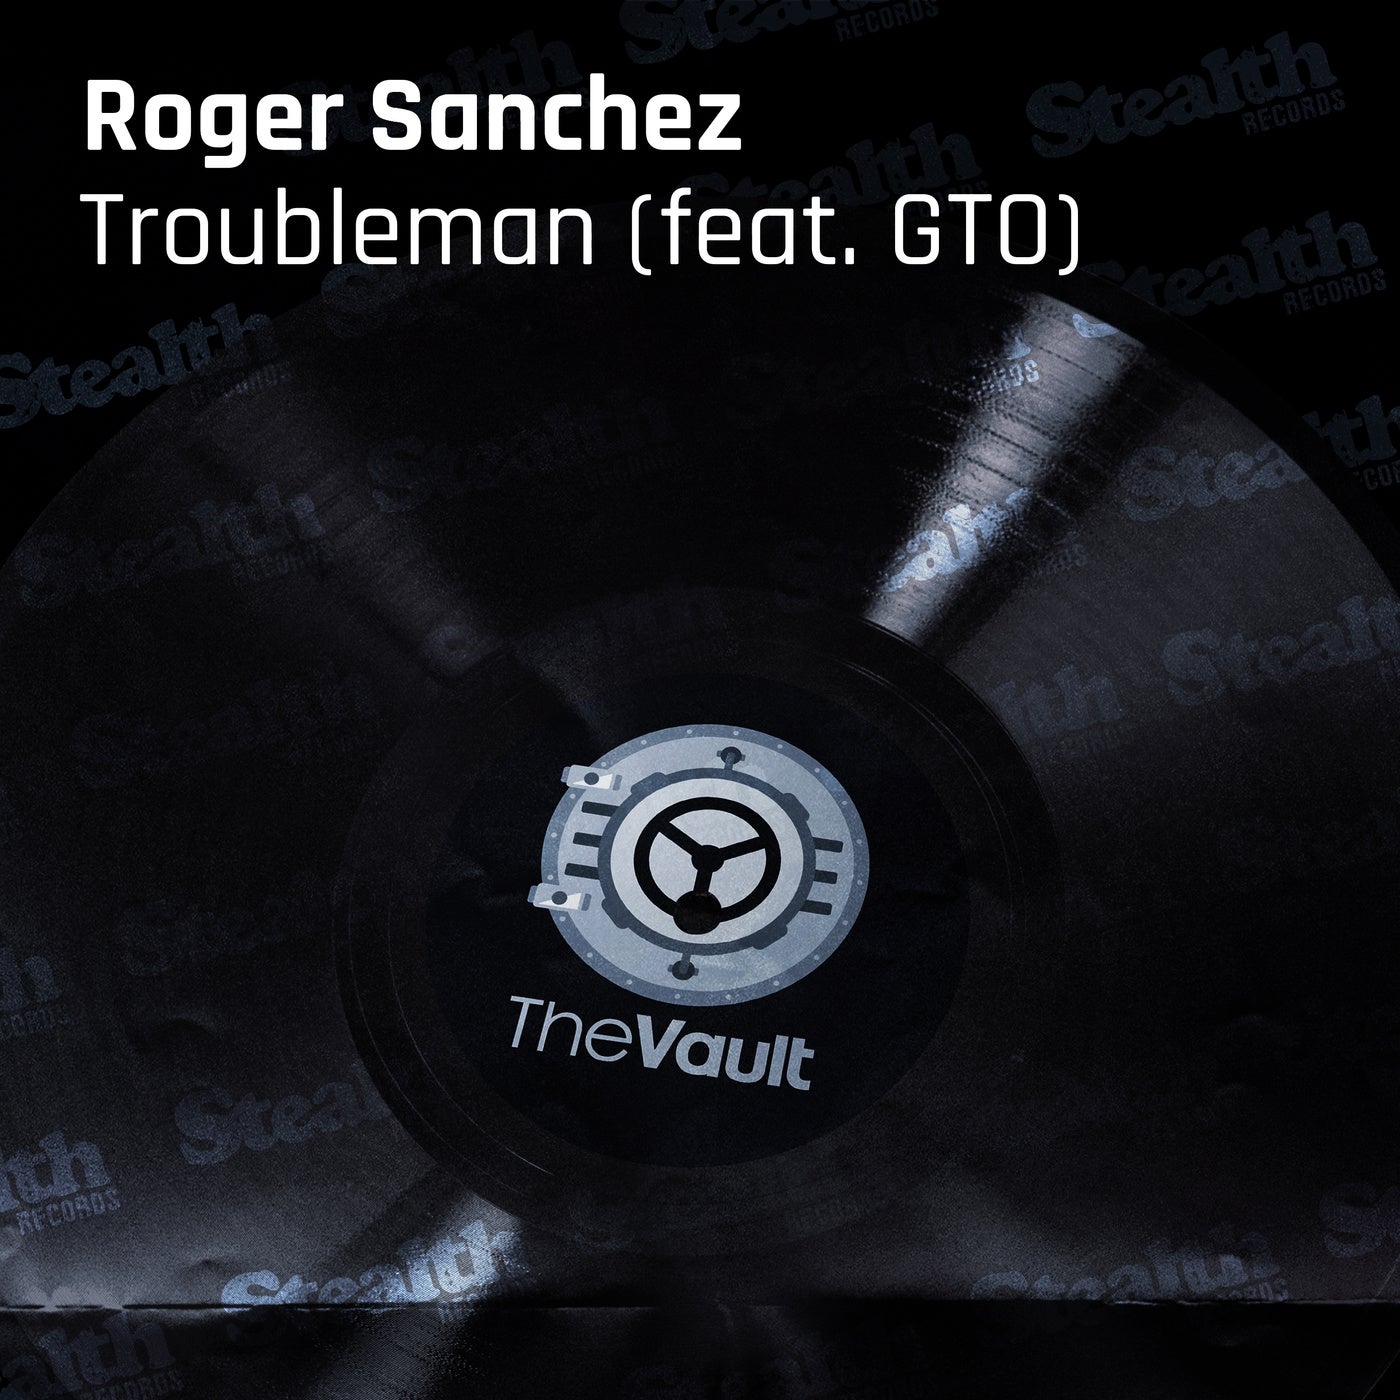 Troubleman (feat. GTO)